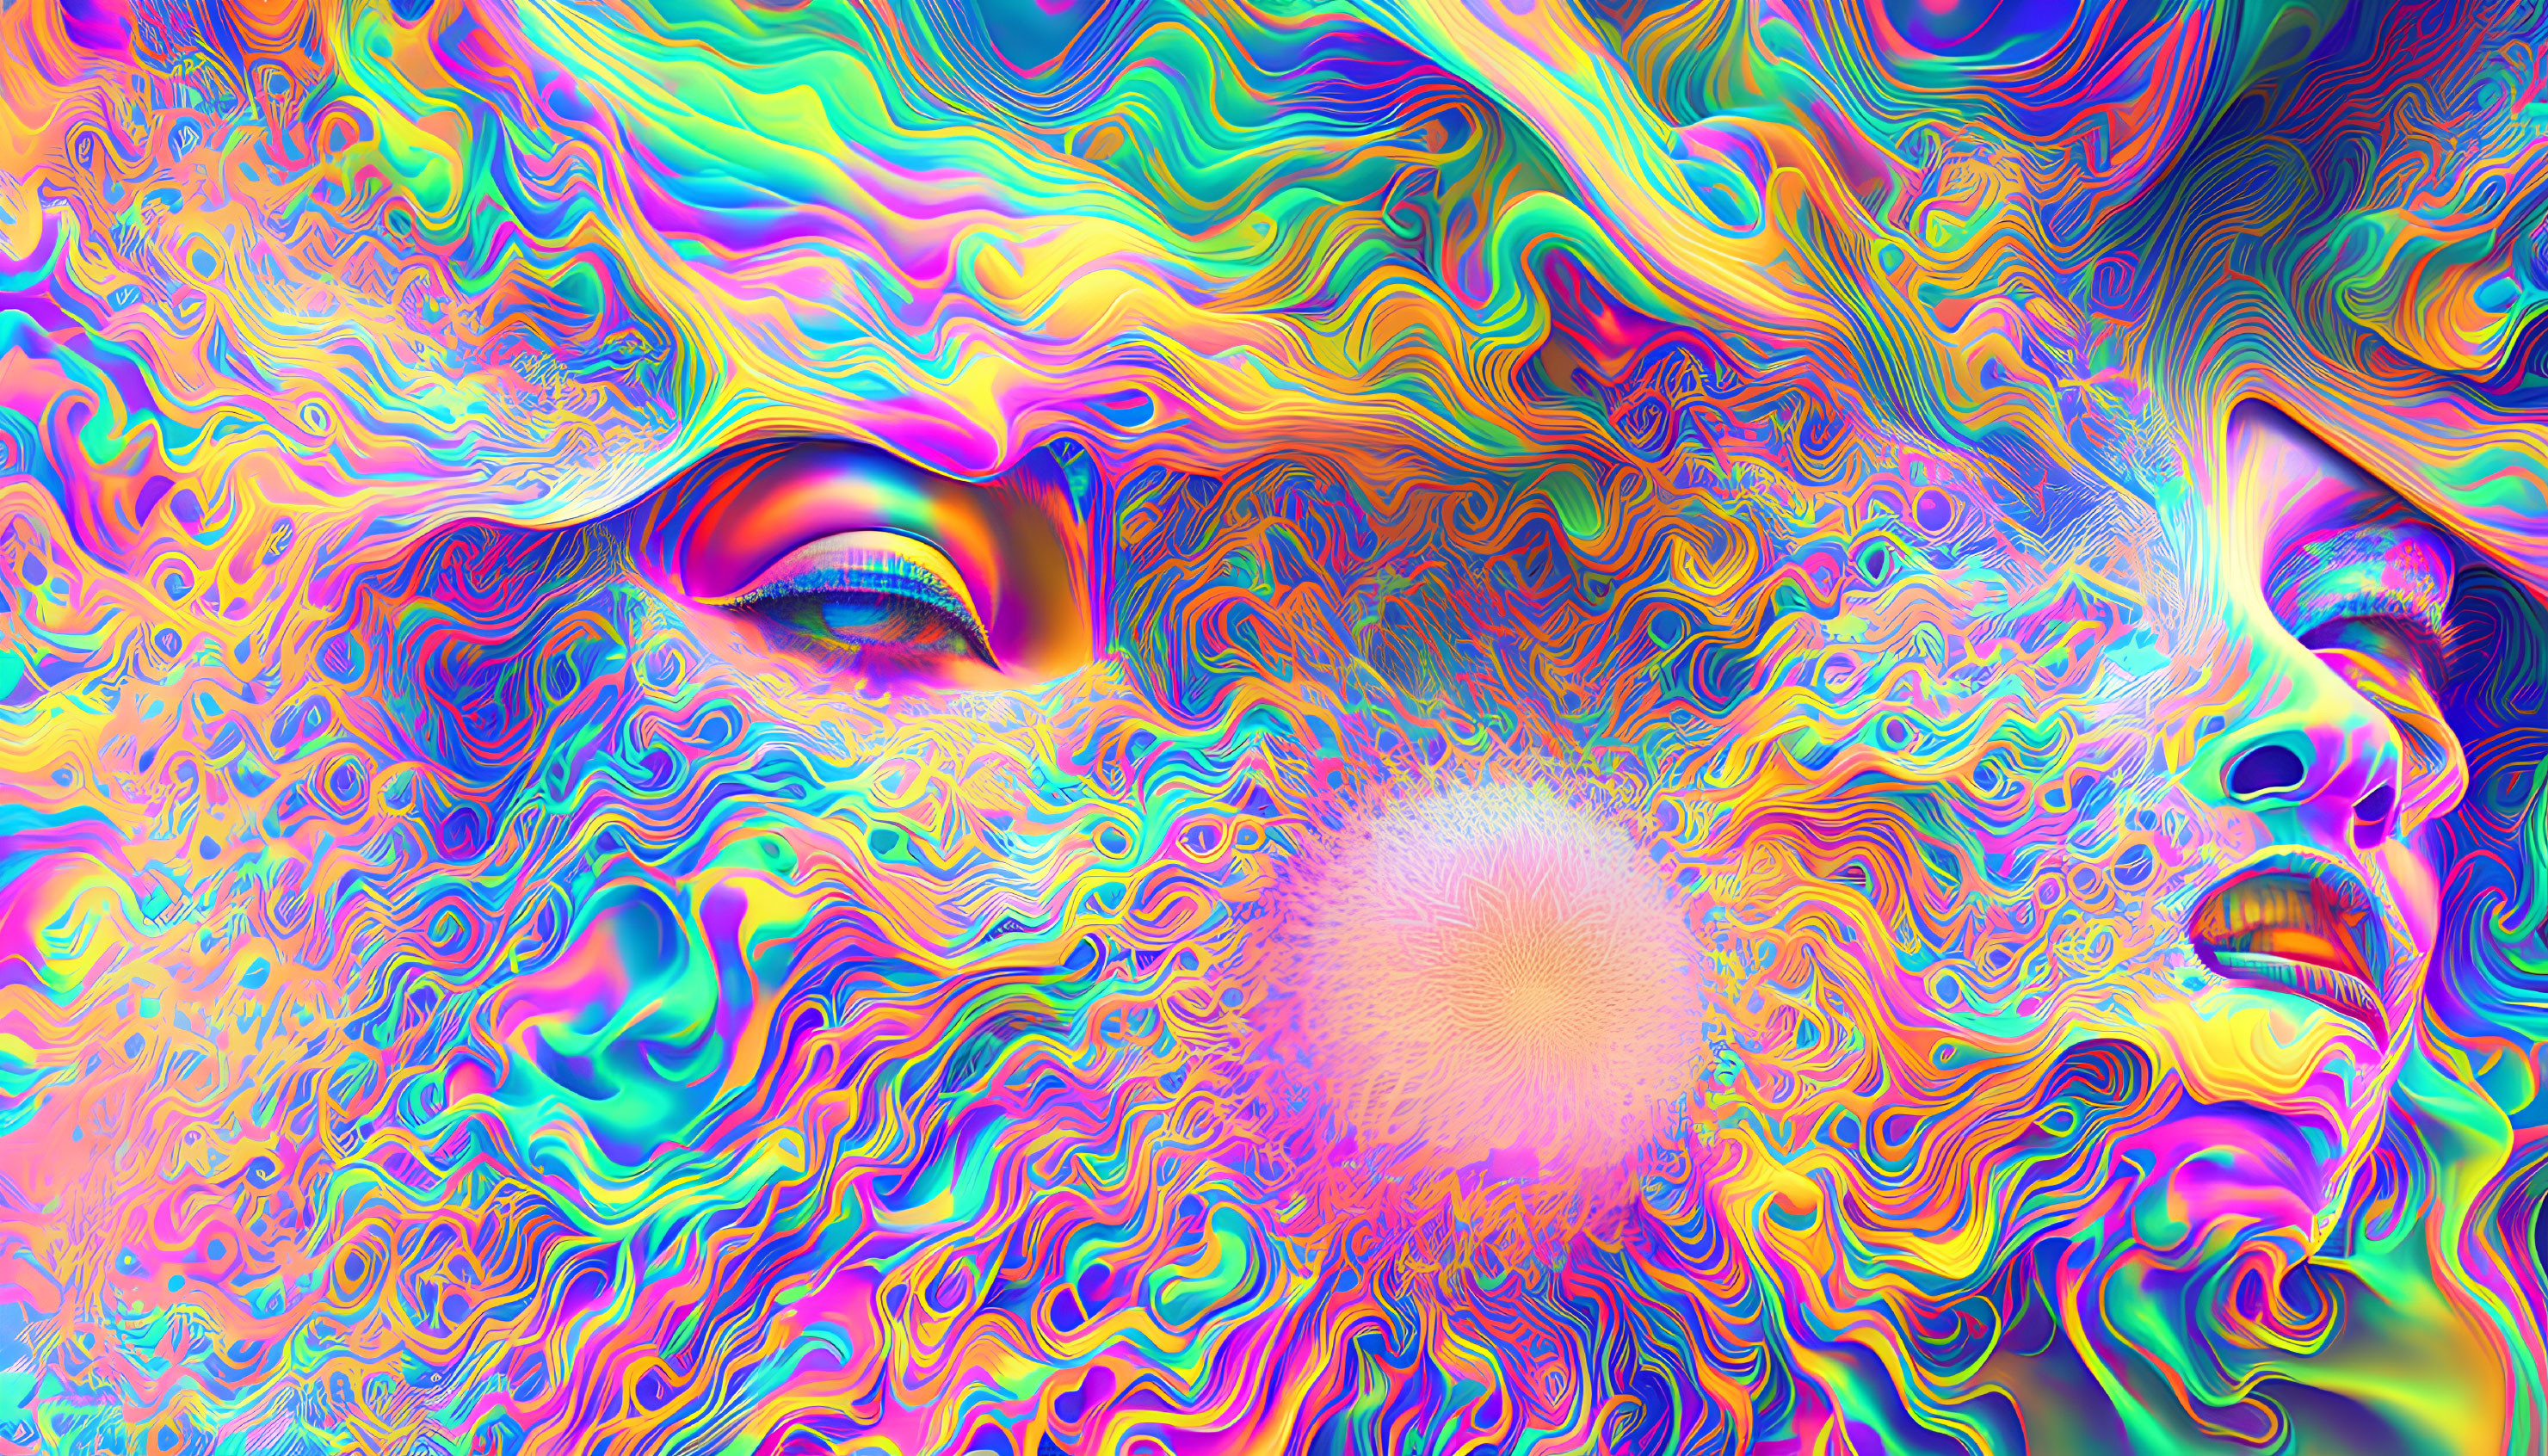 Colorful Abstract Art with Psychedelic Patterns and Human Faces